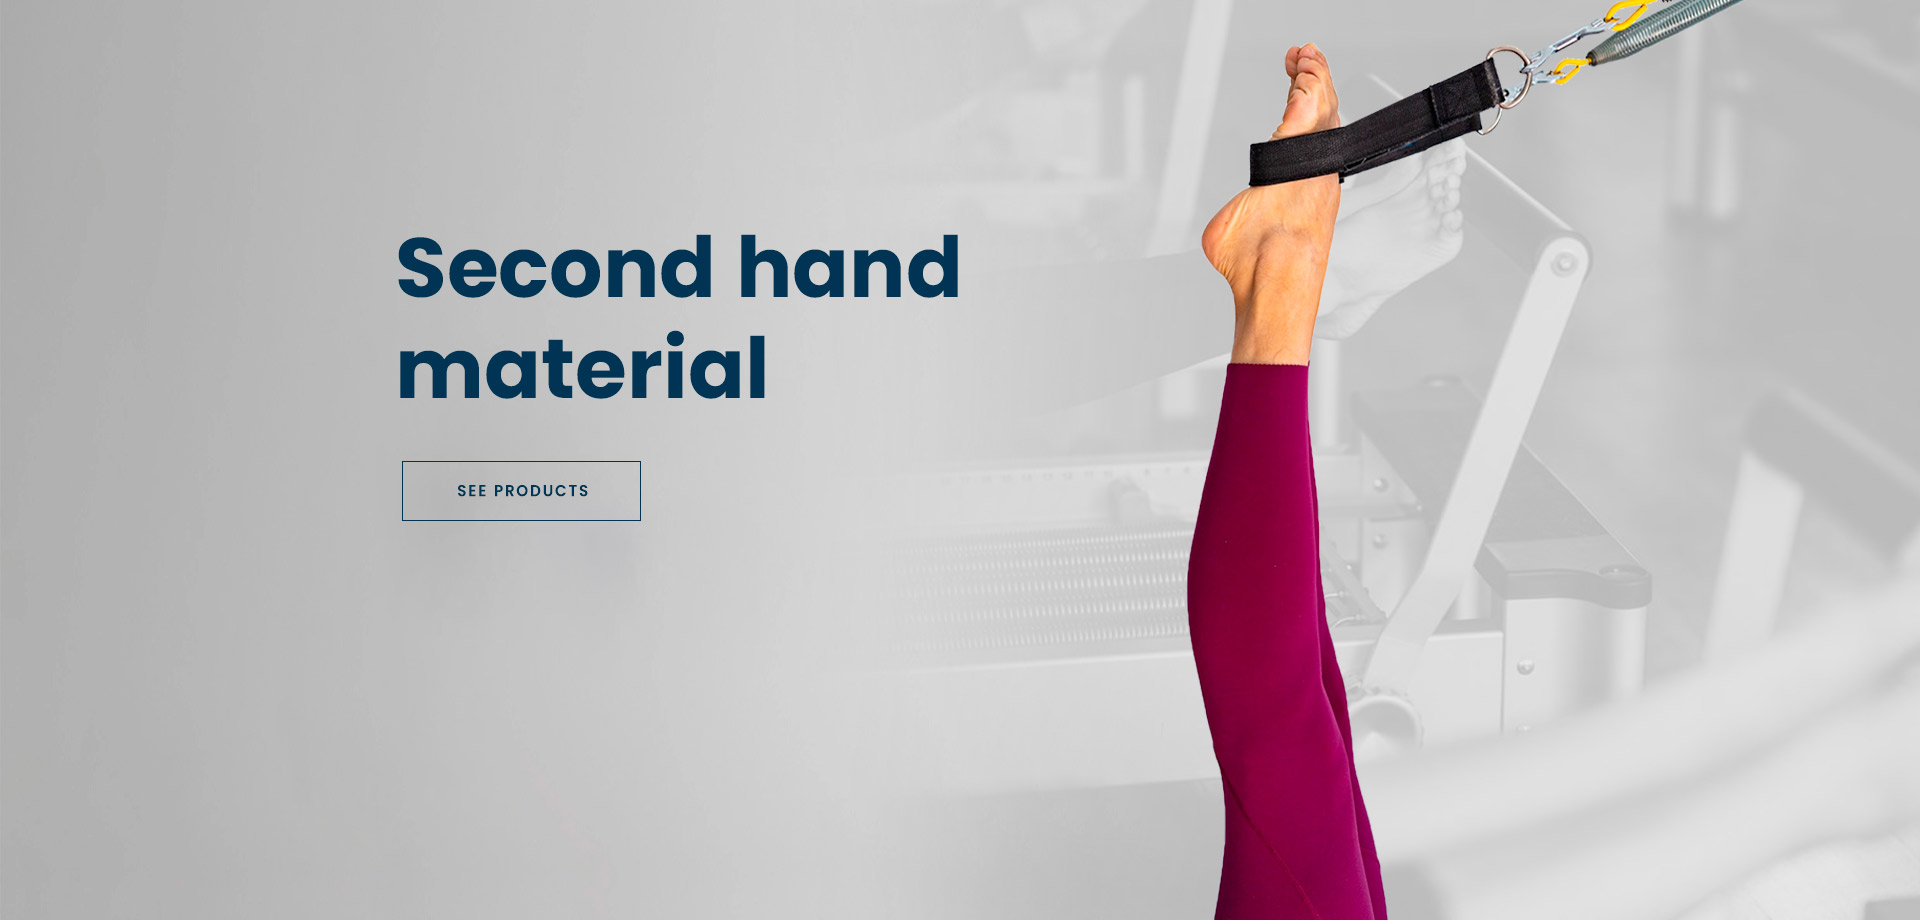 banner material de ocasion eng - Pilates machines: reformer, accessories and material